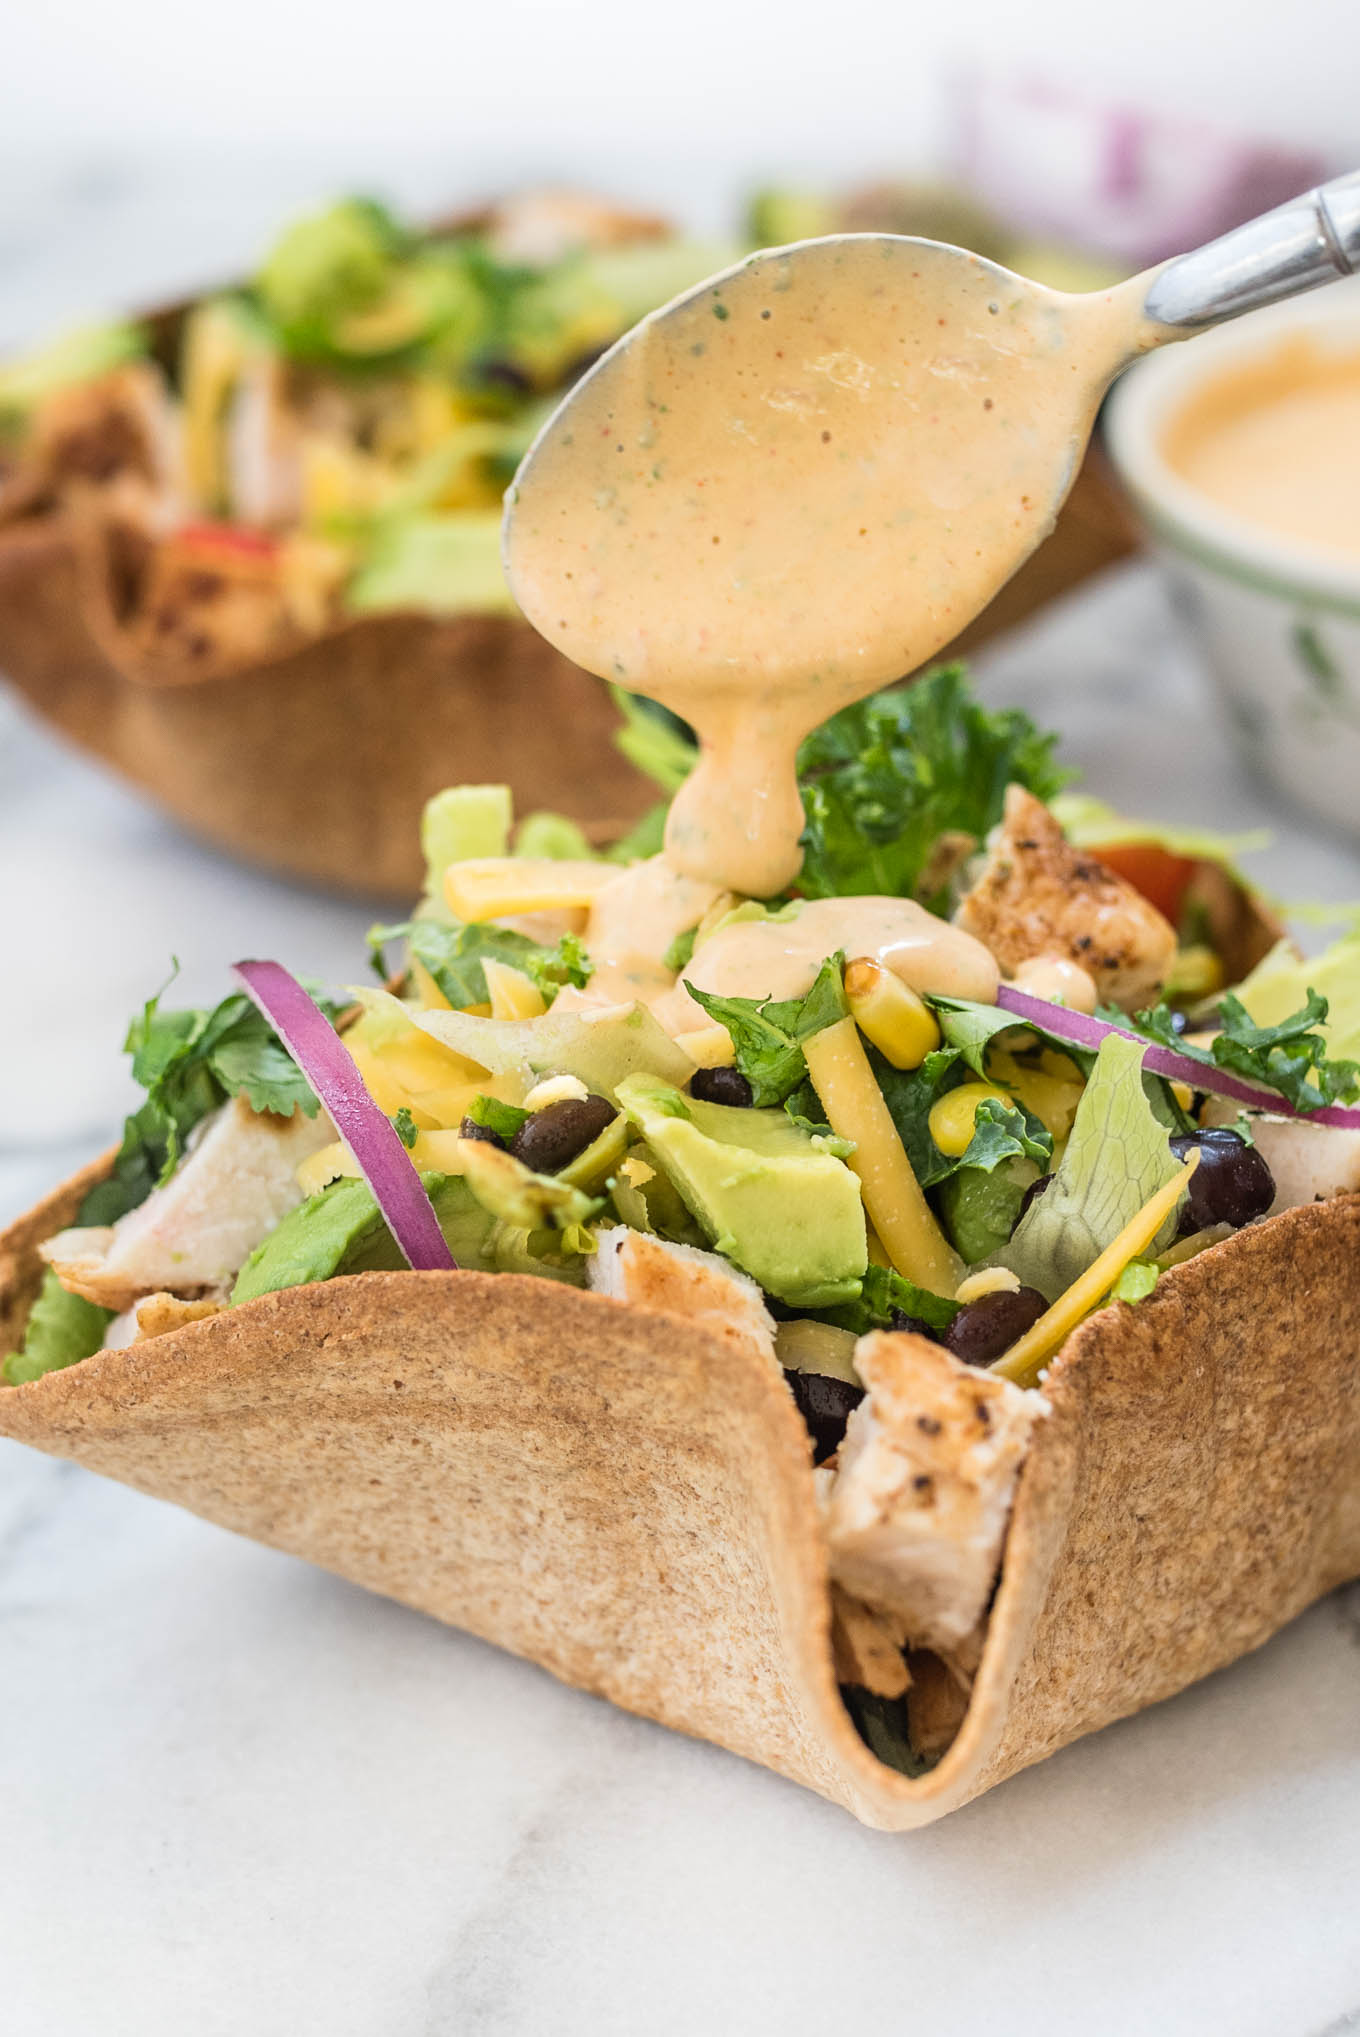 Chicken Taco Salad with Creamy Chipotle Dressing is delicious hearty salad, packed with flavor from the chicken, black beans, avocado and creamy spicy chipotle dressing.